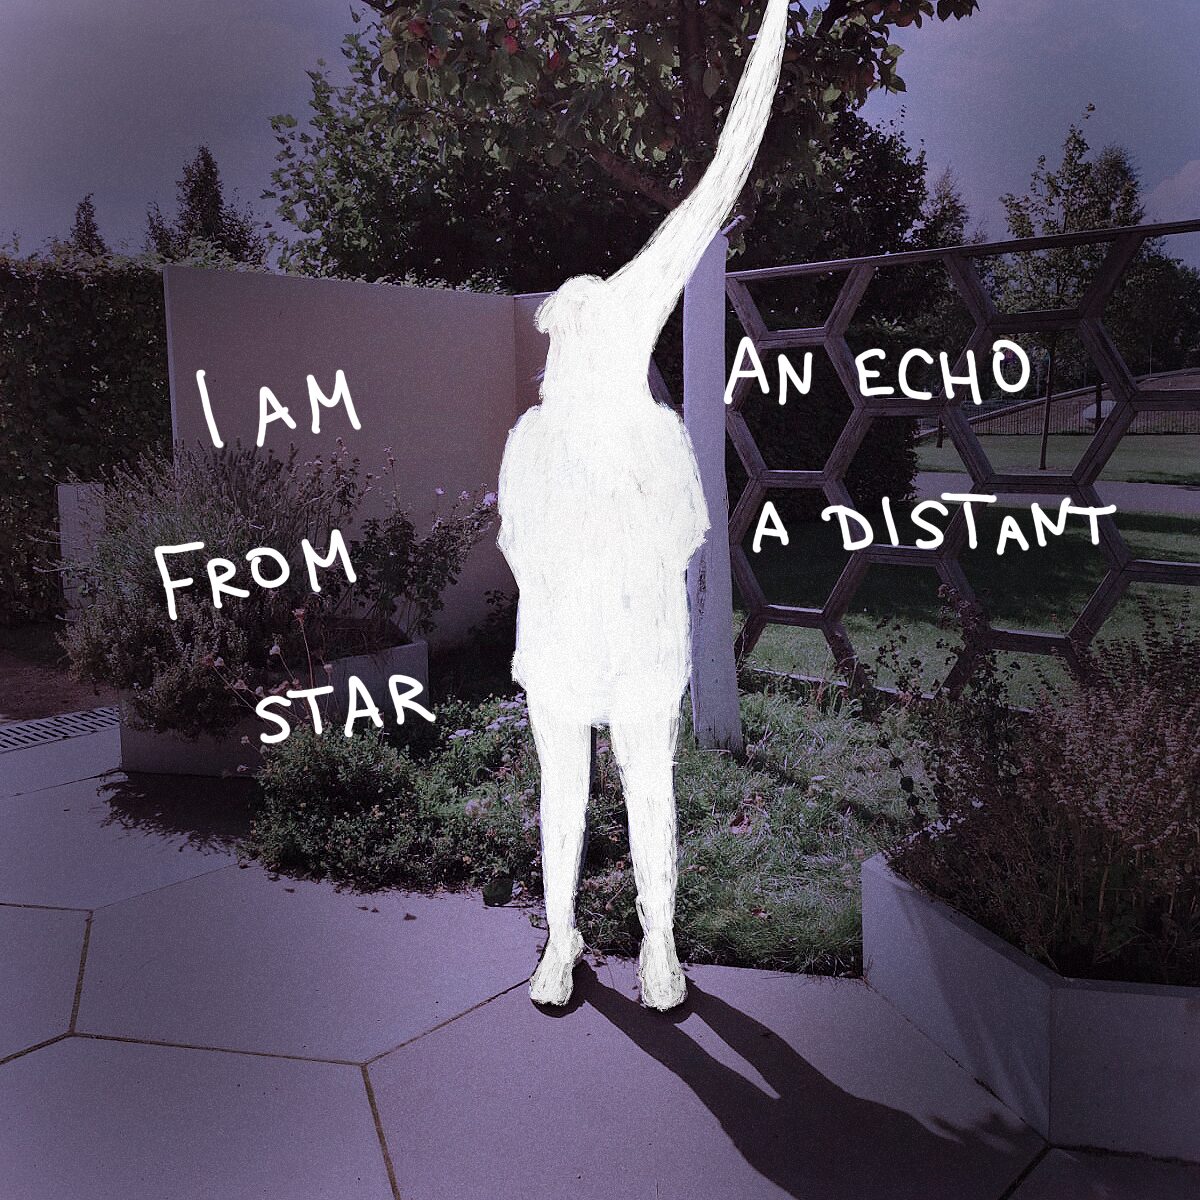 Text on the picture: I am an echo from a distant star.